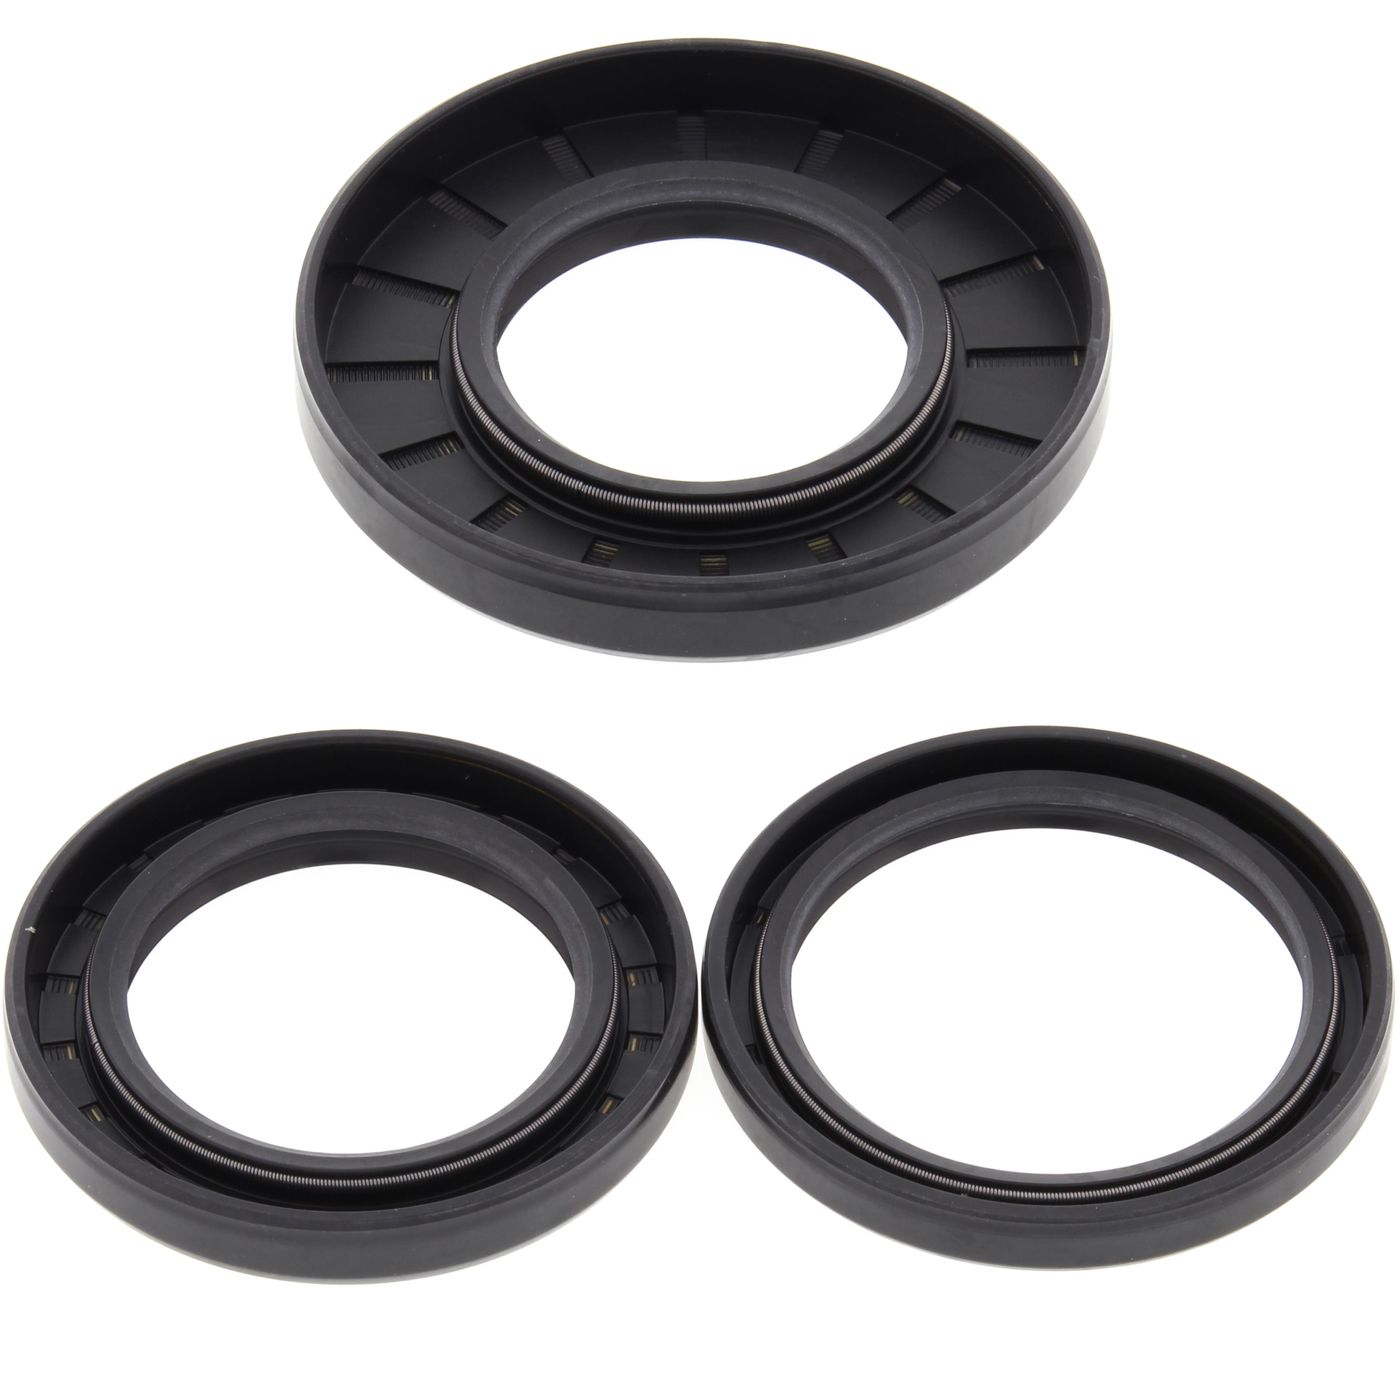 Wrp Diff Seal Kits - WRP252021-5 image